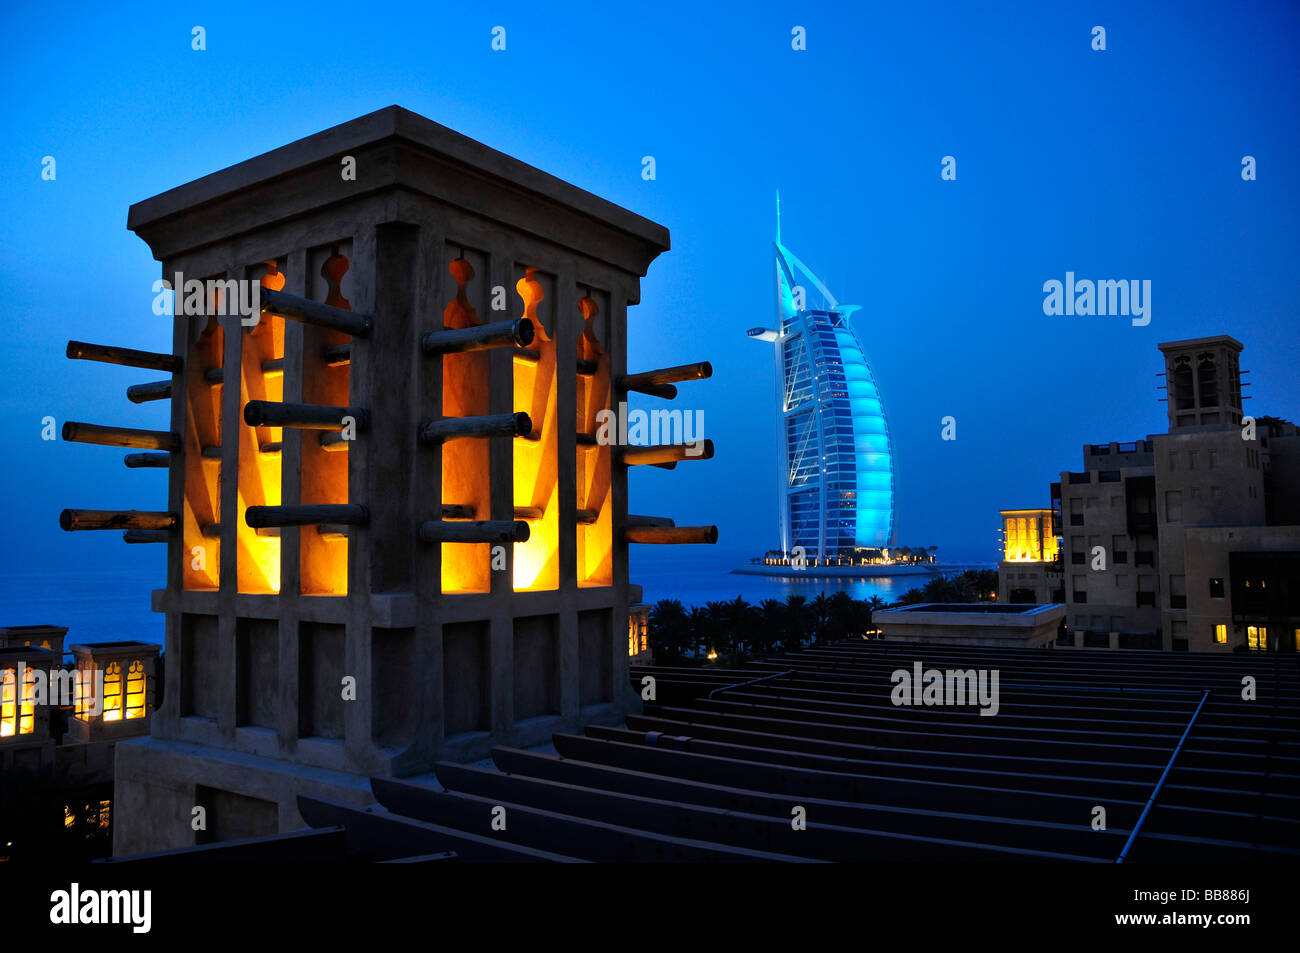 Stylized wind tower of the Madinat Jumeirah resort in front of the illuminated facade of the seven-star hotel Burj al Arab, Ara Stock Photo